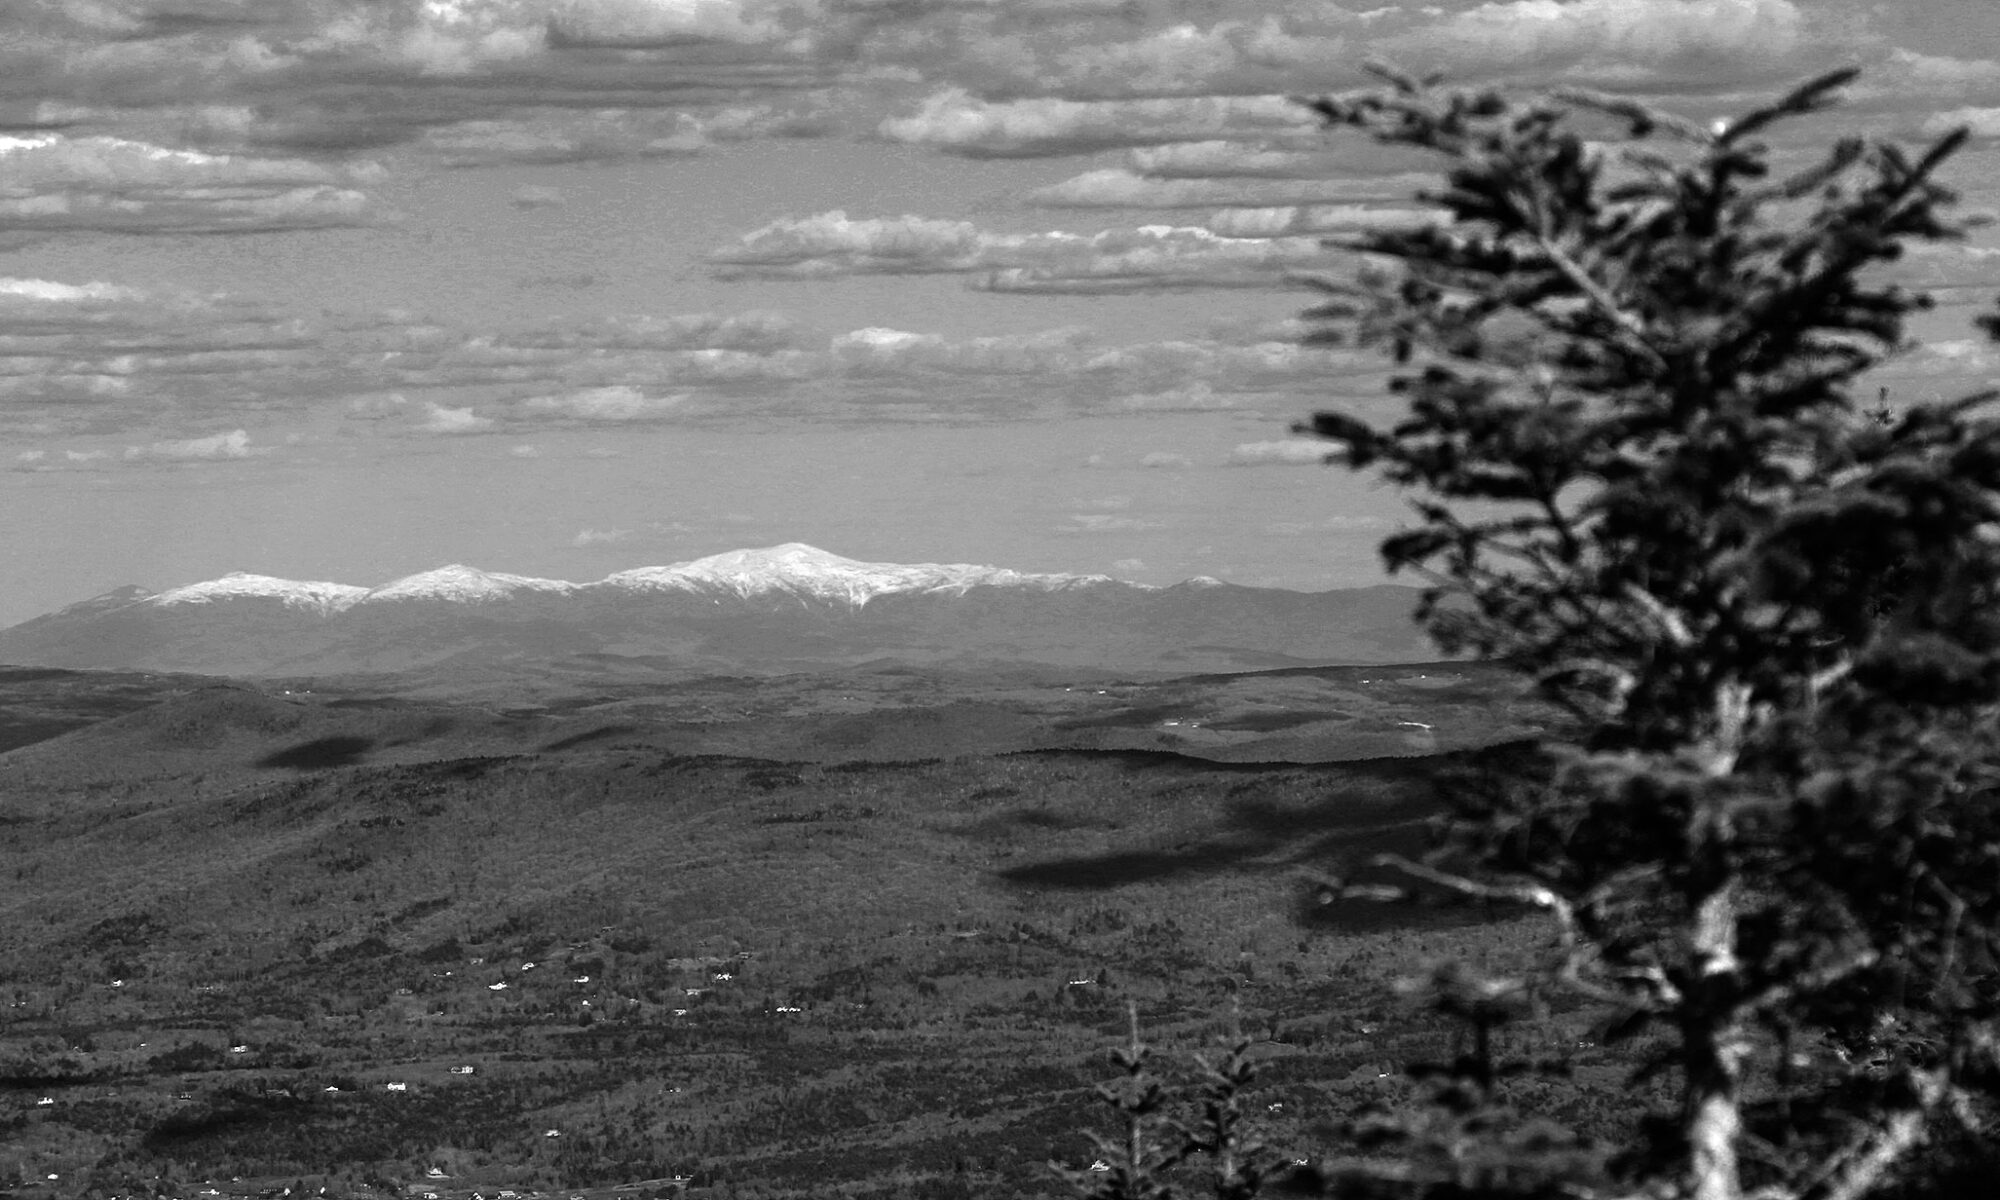 A black and white image of the Presidential Range with snow taken in May from Mt. Mansfield in Vermont